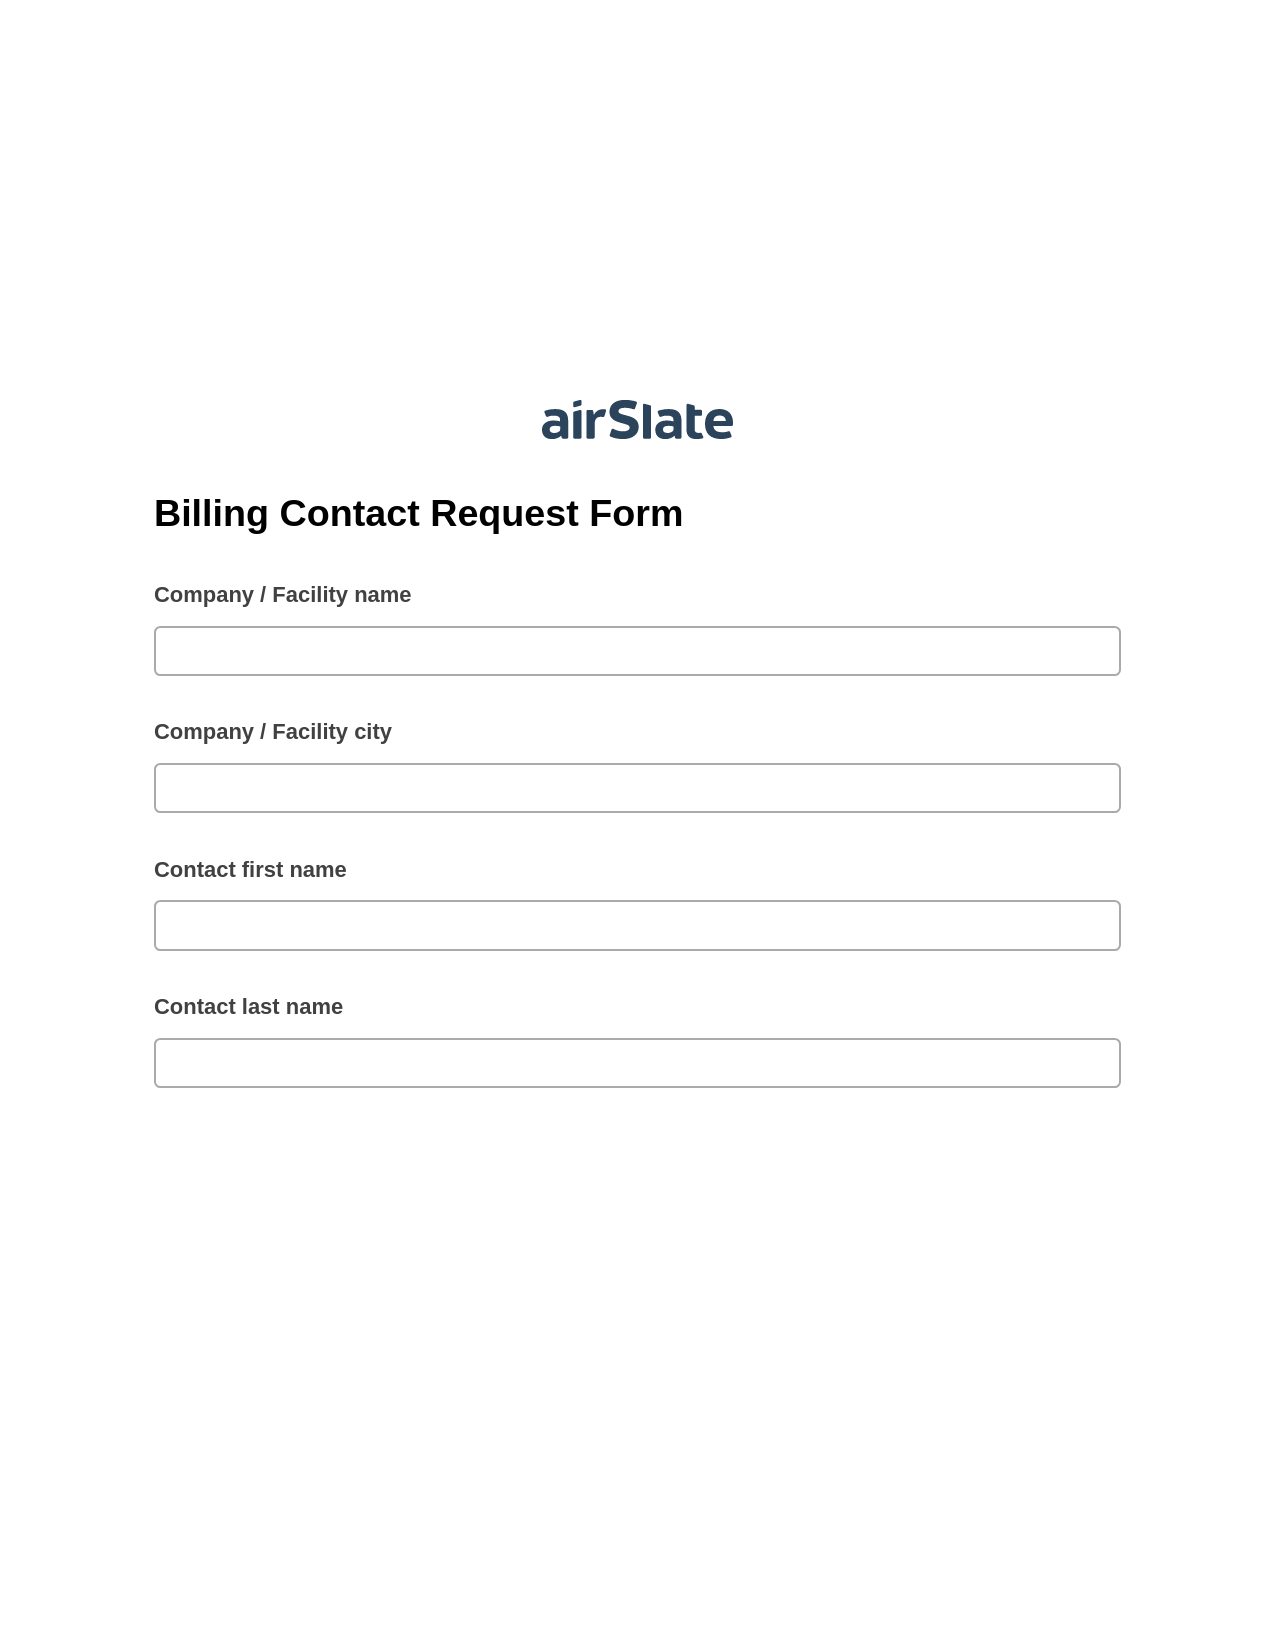 Billing Contact Request Form Pre-fill Document Bot, Remove Slate Bot, Email Notification Postfinish Bot